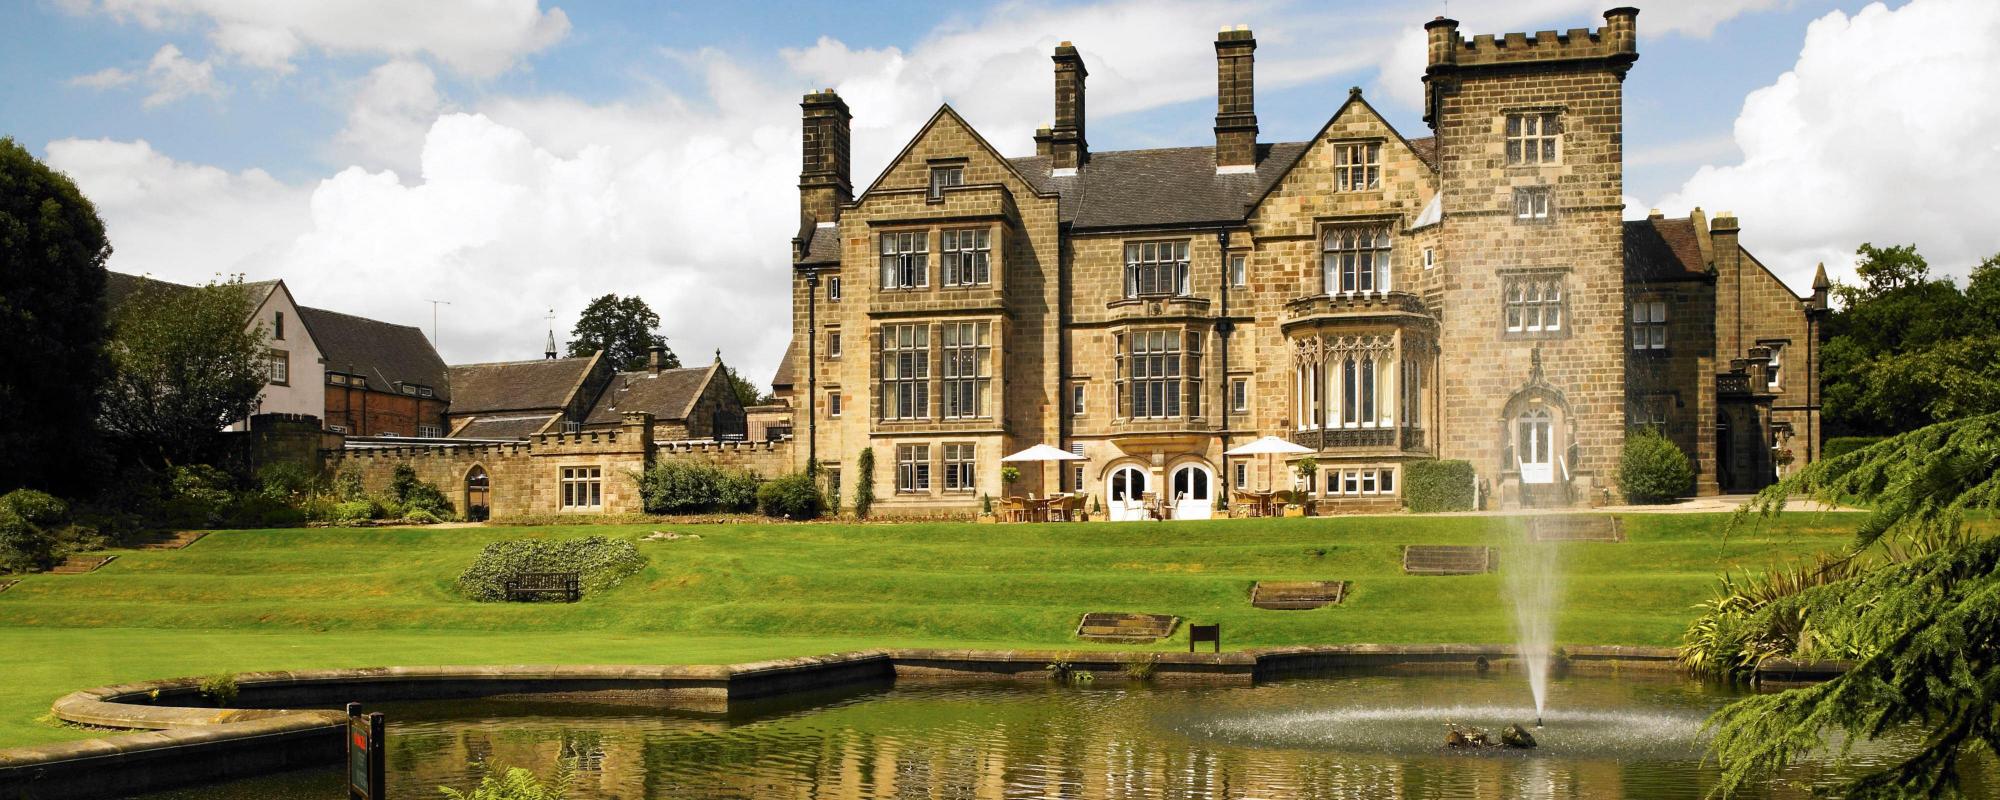 Breadsall Priory Marriott Hotel  Country Club